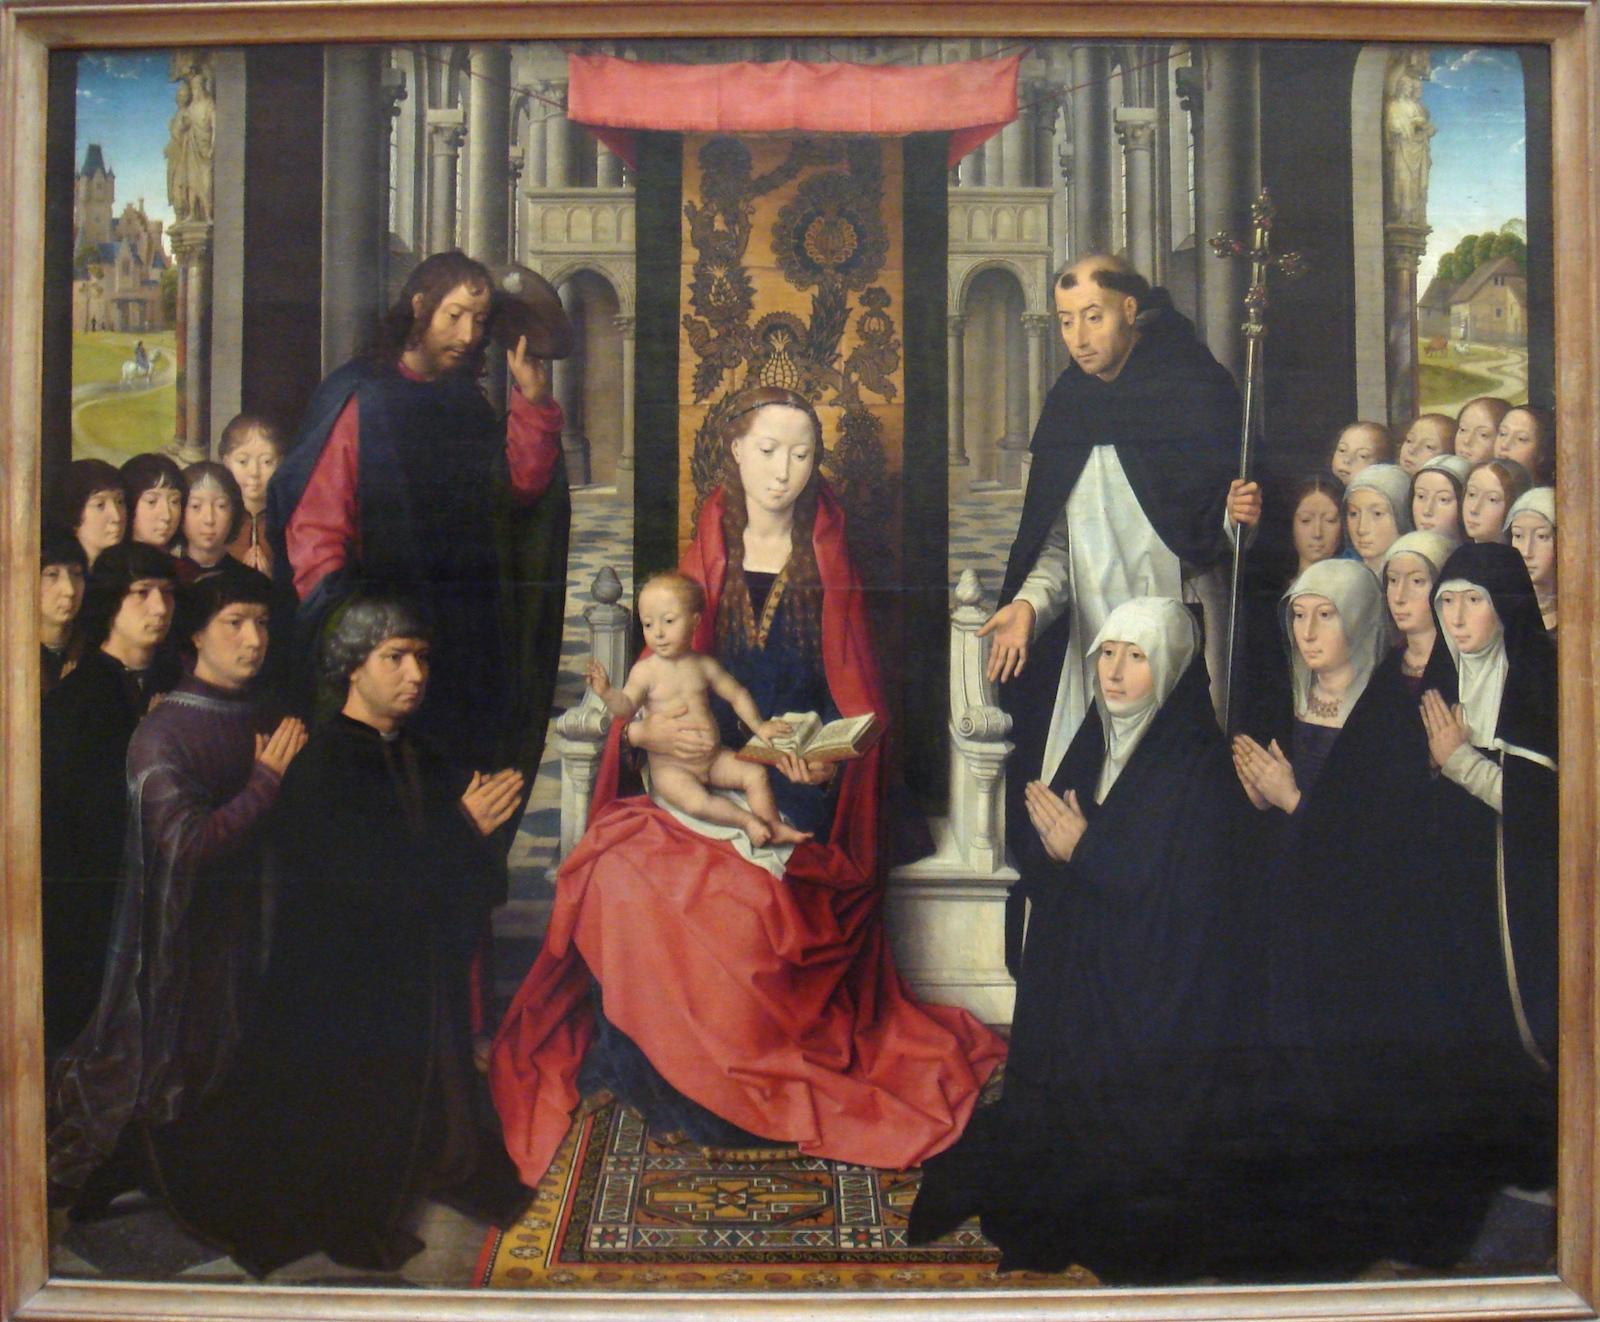 Hans Memling, 1485-1490, The Virgin and Child between St James and St Dominic, Oil on oak wood, Louvre Museum 